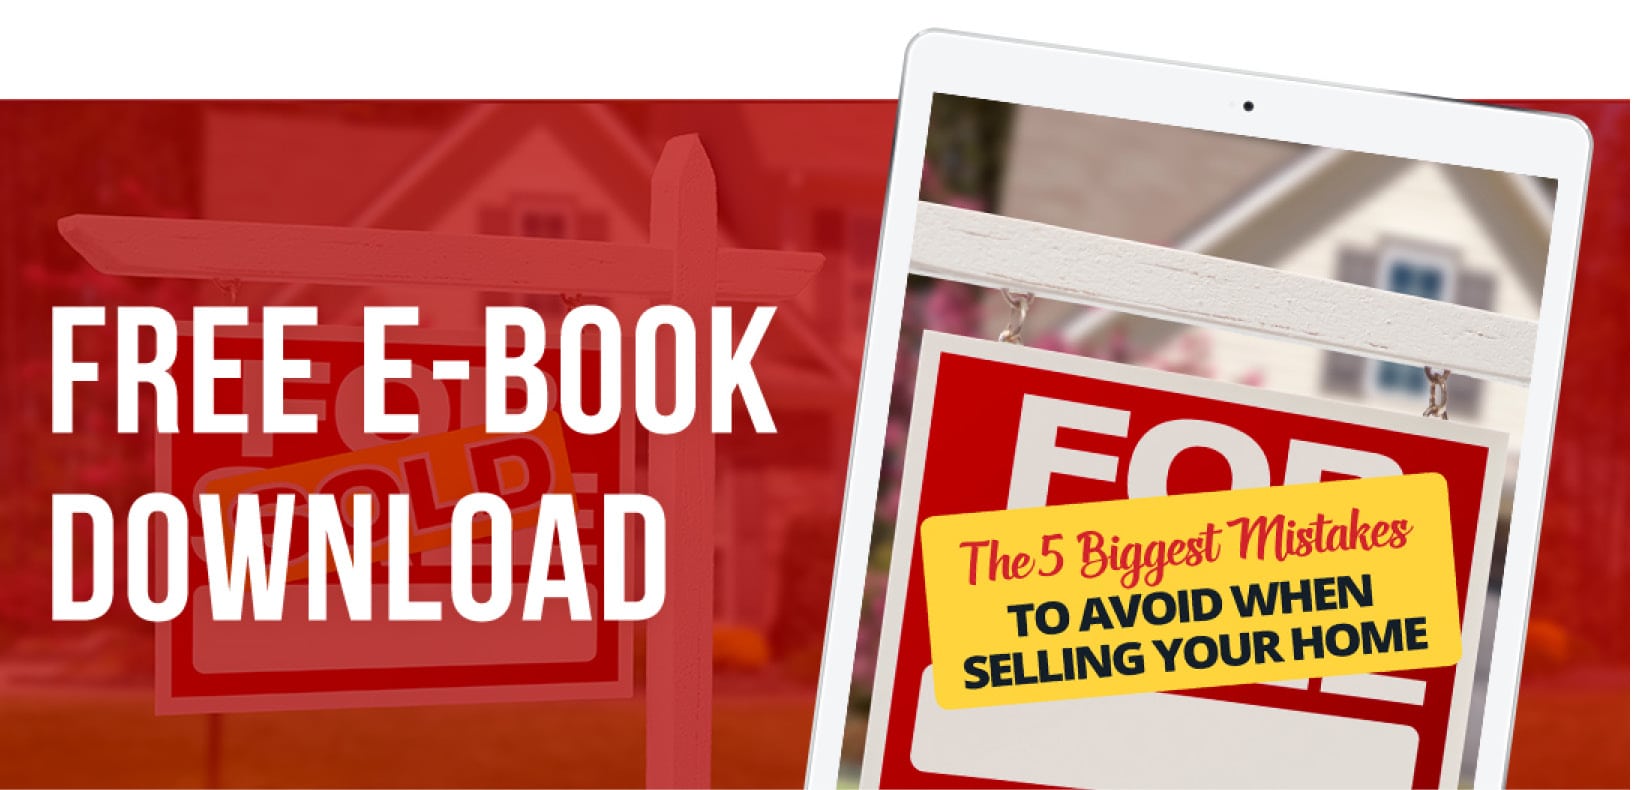 Free download of a free e-book titled the 5 biggest mistakes to avoid when selling your home.